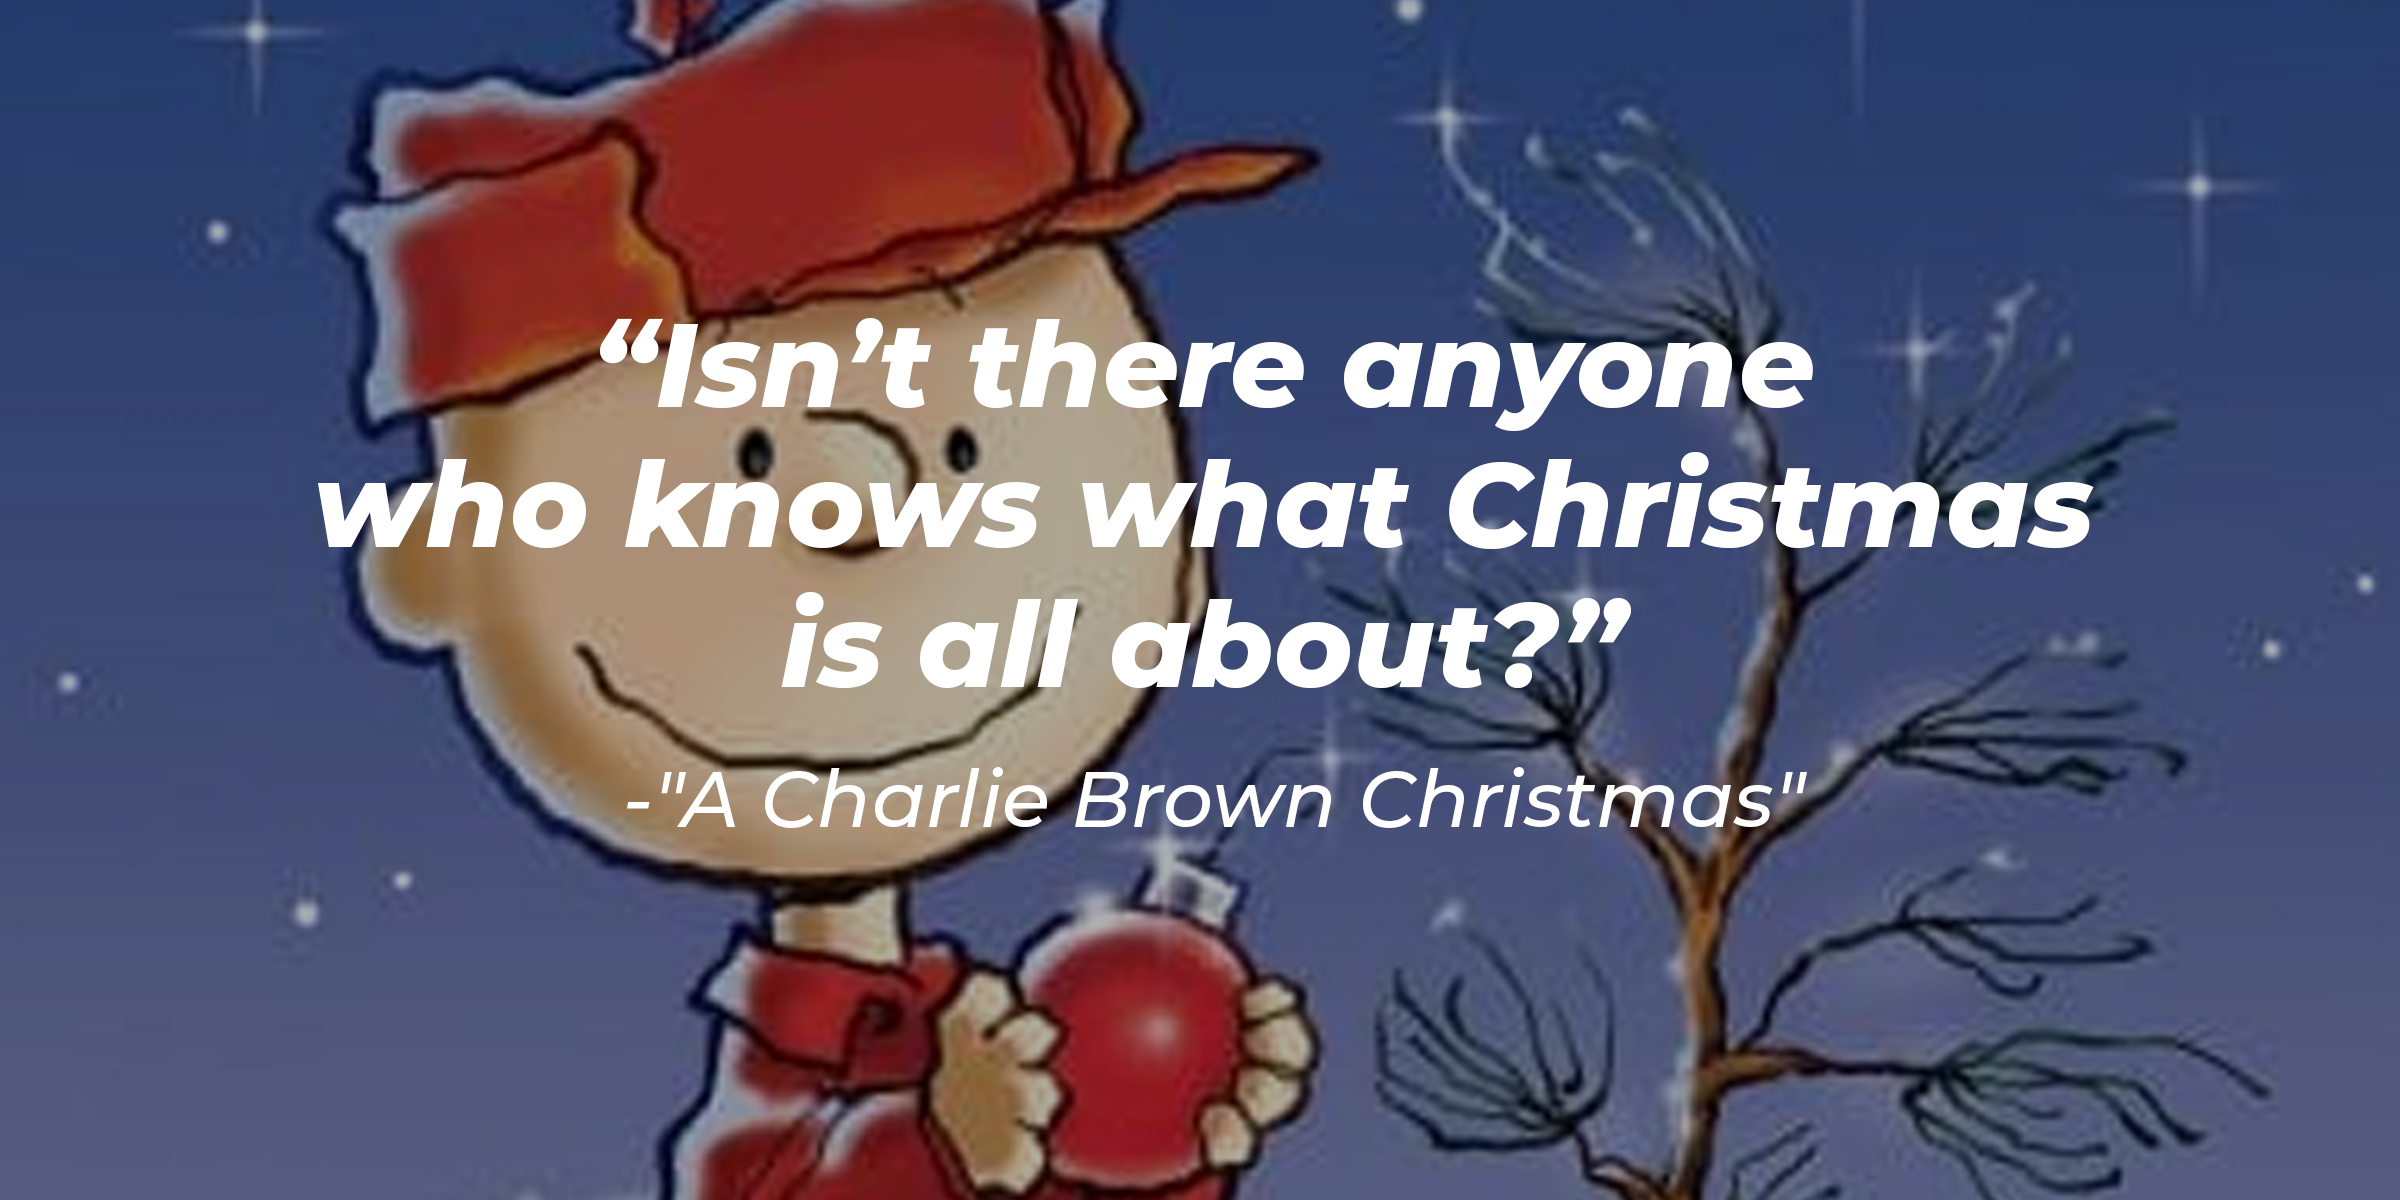 Charlie Brown's quote: "Isn’t there anyone who knows what Christmas is all about?" | Source: Facebook/ACharlieBrownChristmastvshow